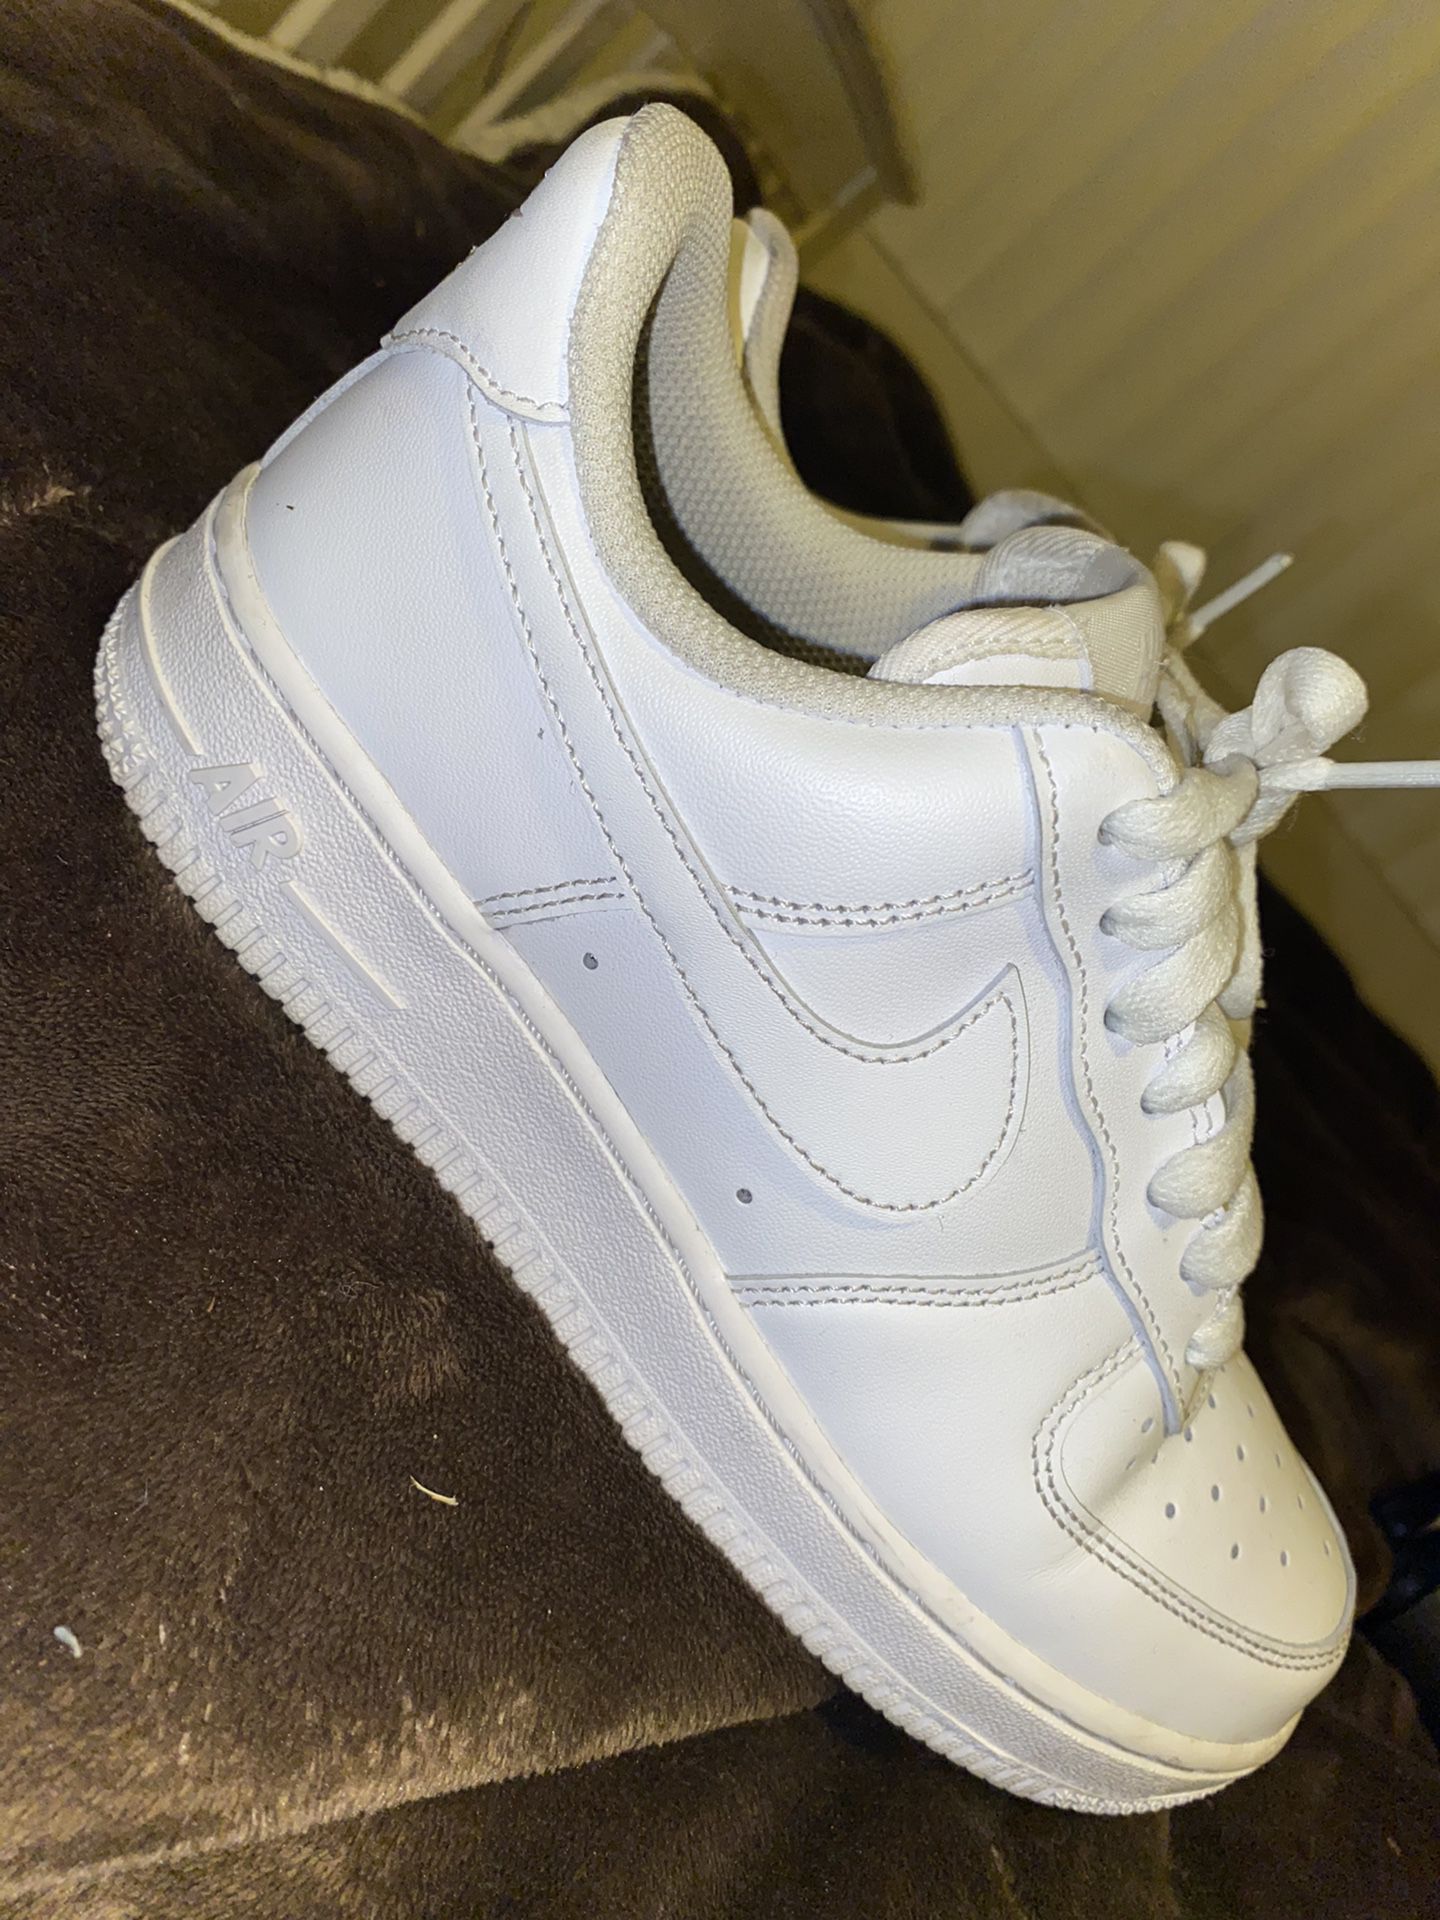 all white air force 1's 